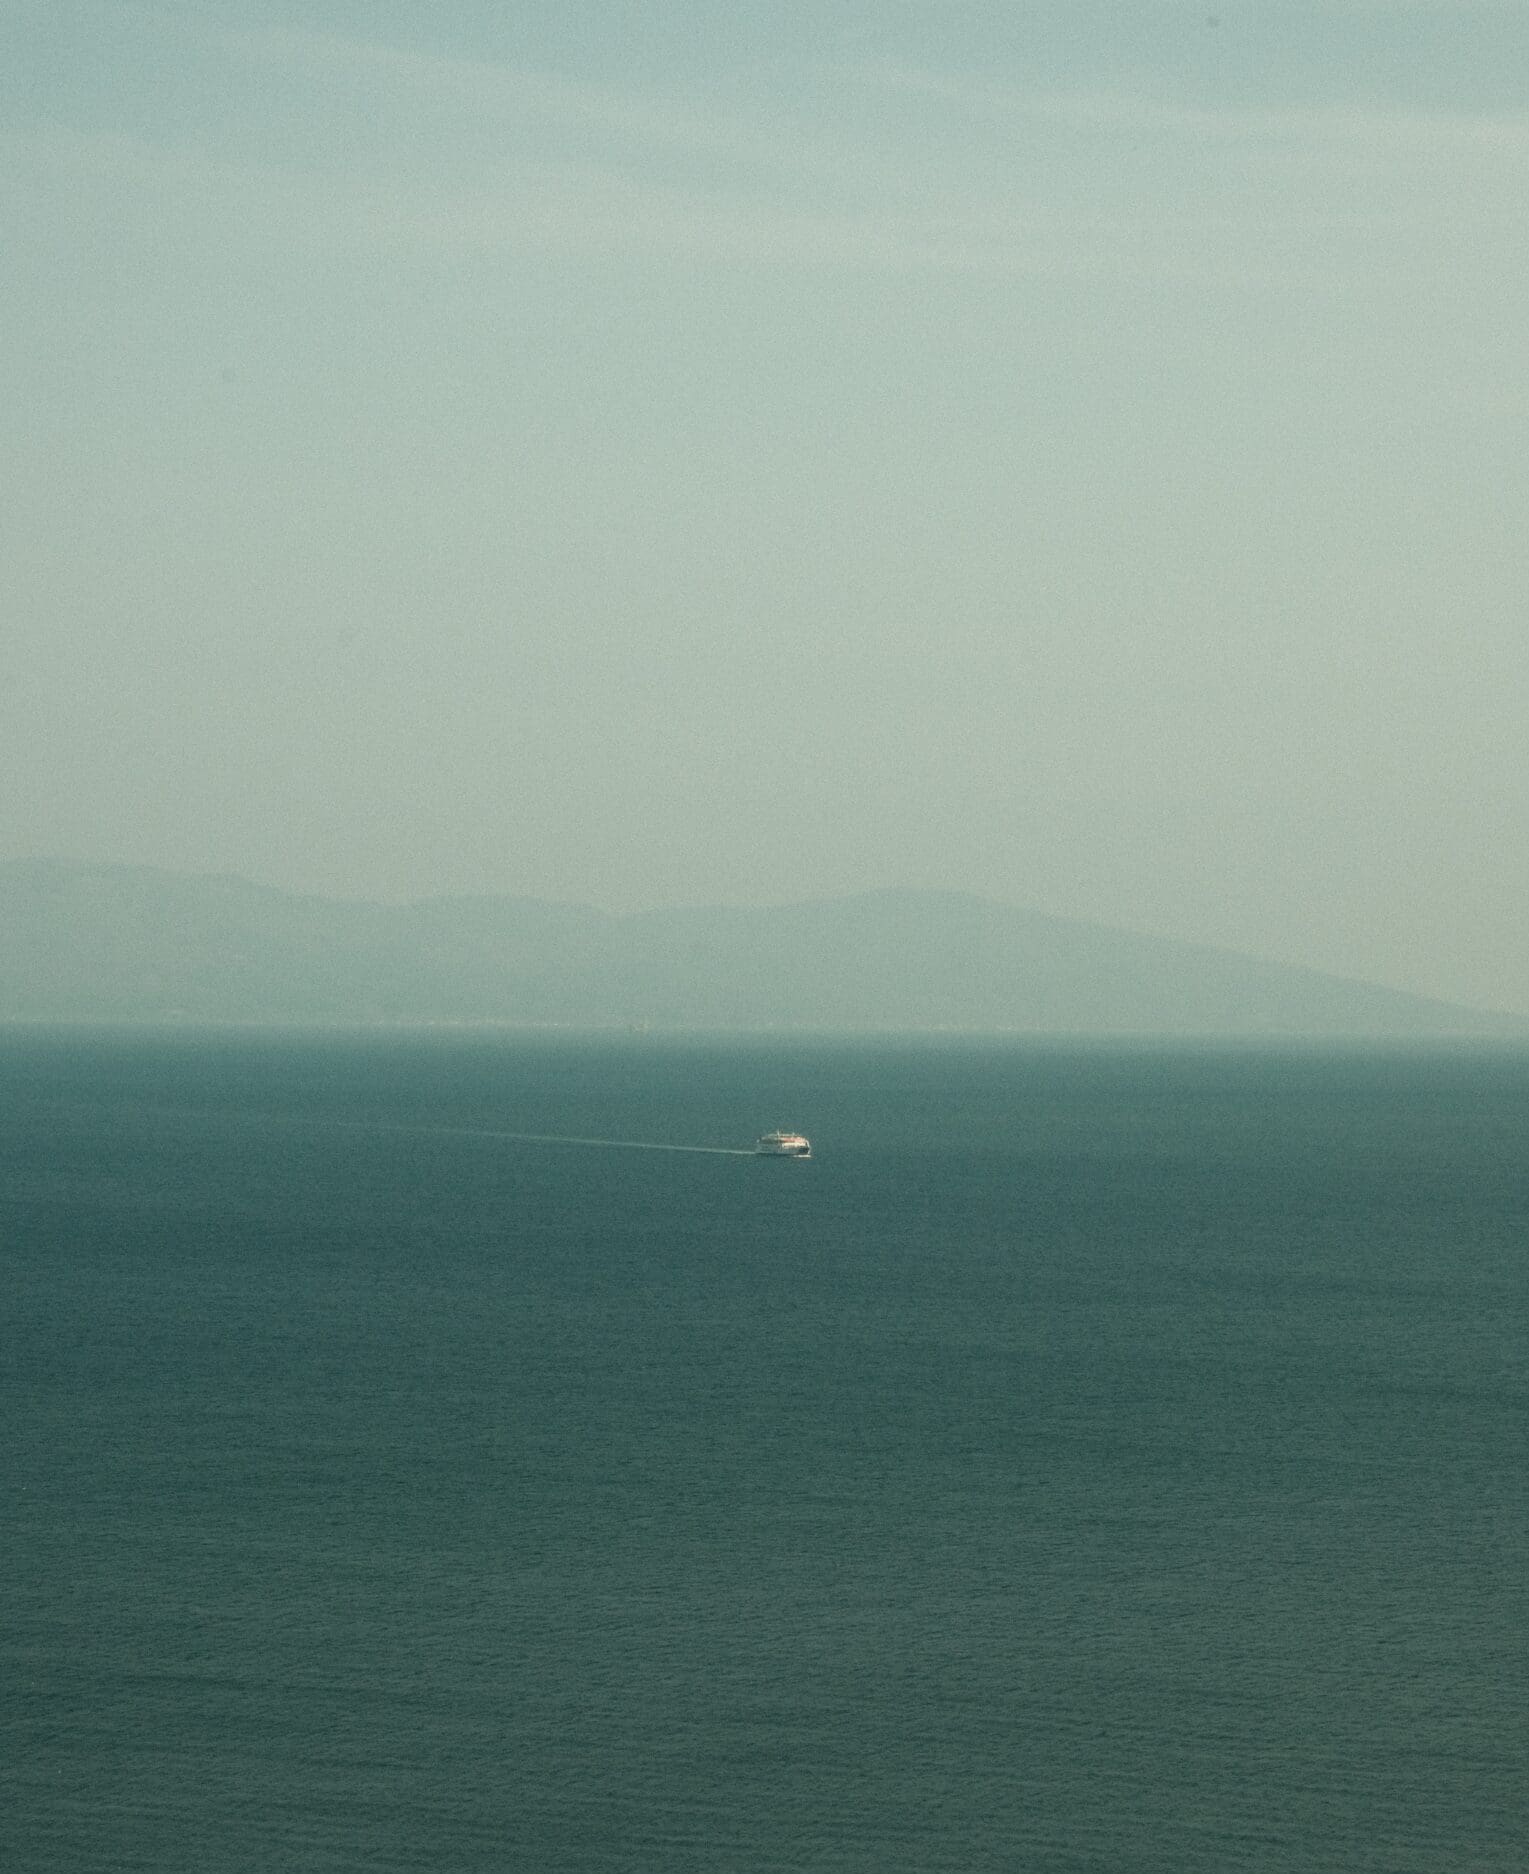 Sustainability and ferry boats | A ferry boat in the distance in the sea on a misty day